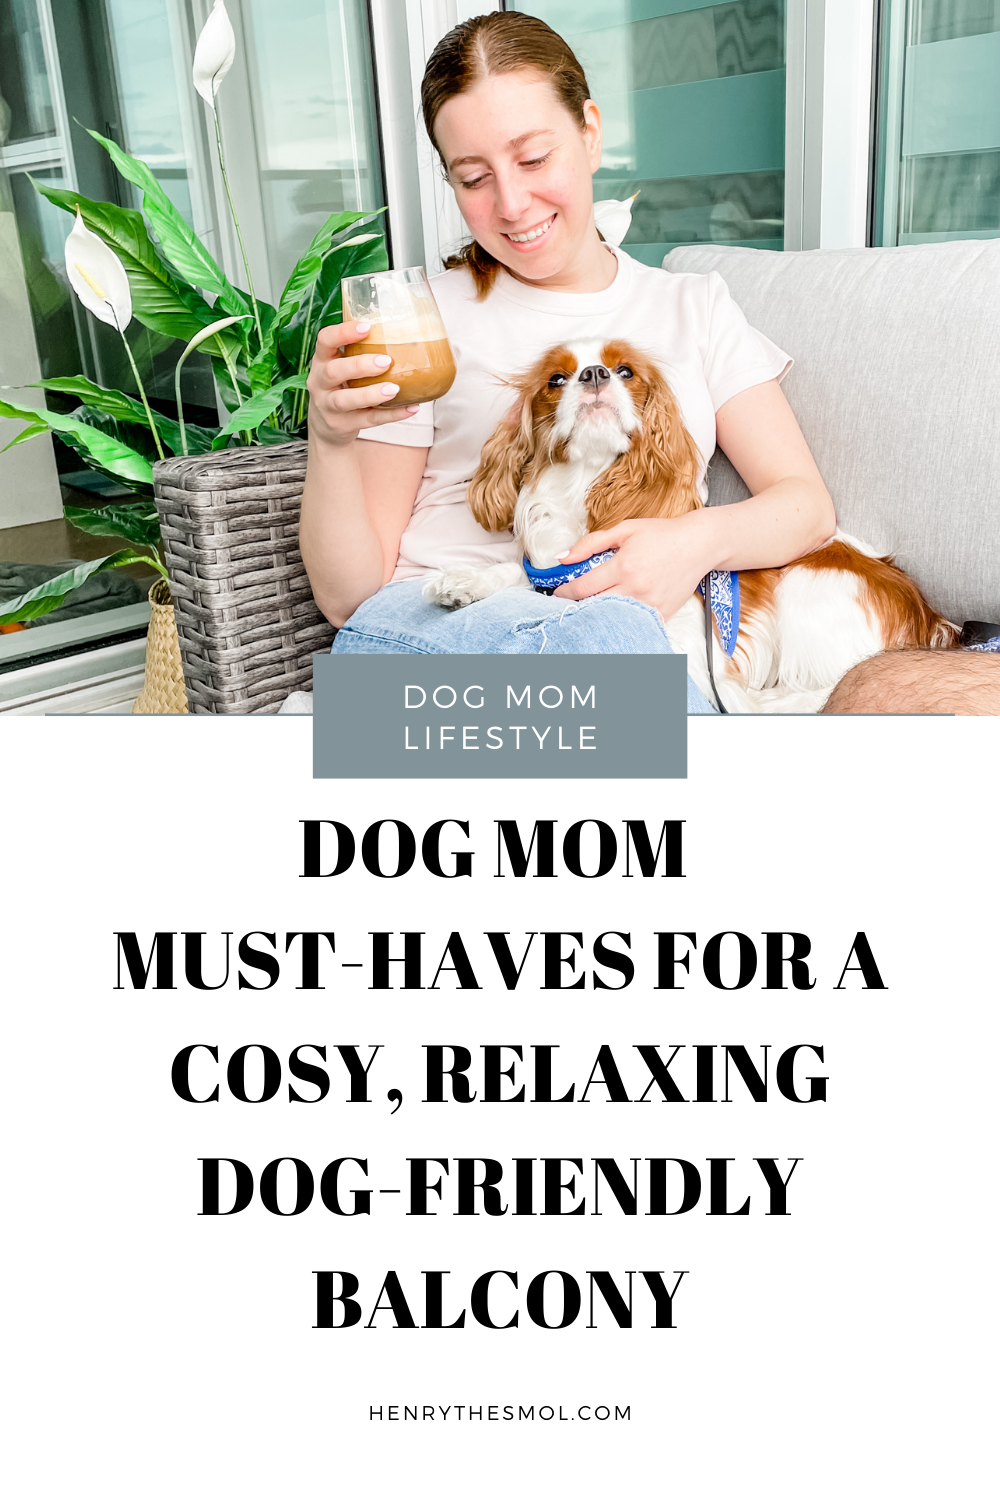 How Dog Moms Can Relax: Dog-Friendly Balcony Finds